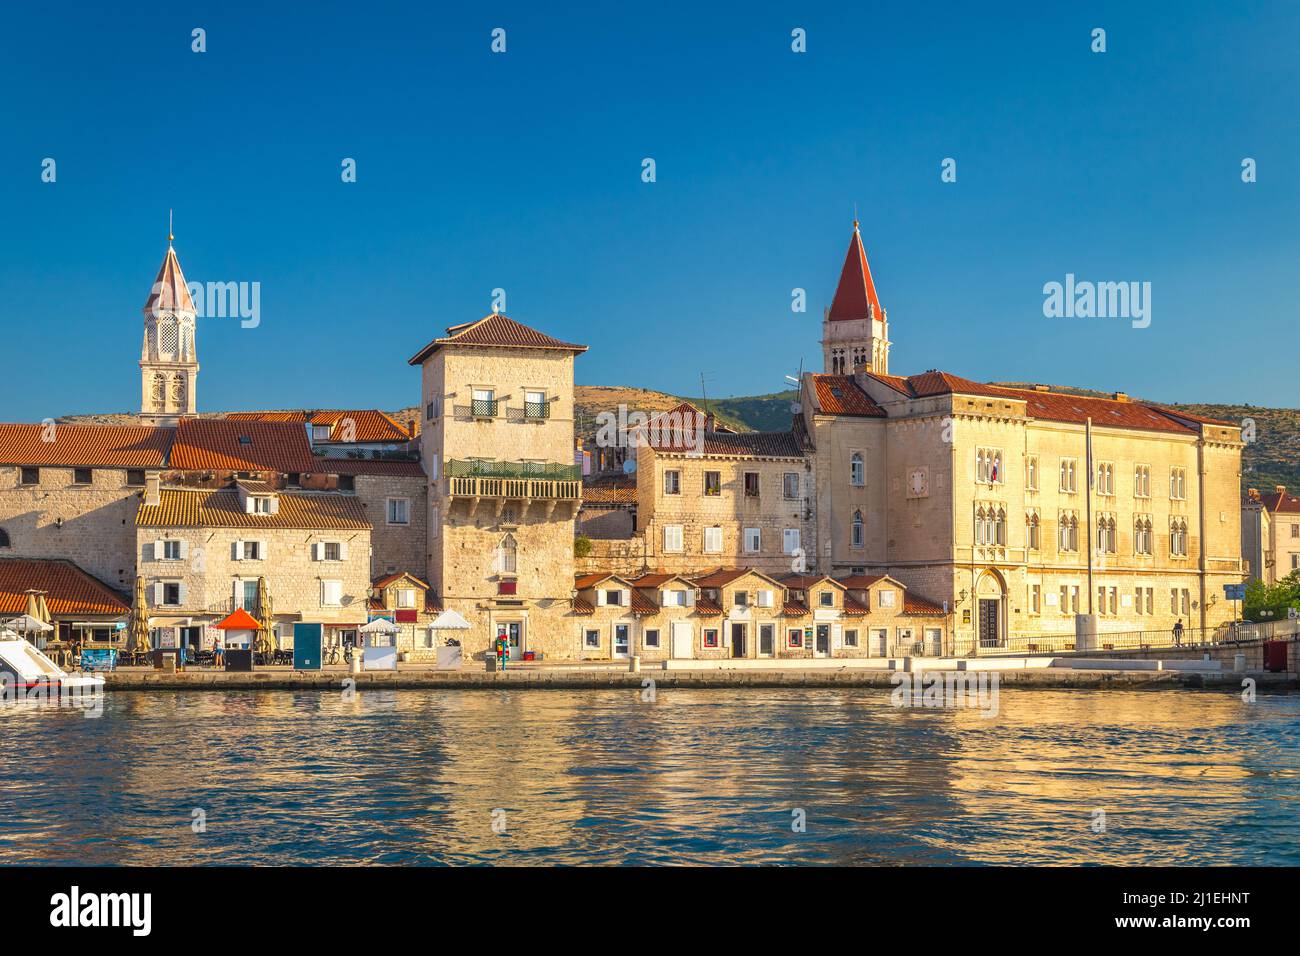 Waterfront with promenade in The Old town of Trogir, Croatia, Europe. Stock Photo